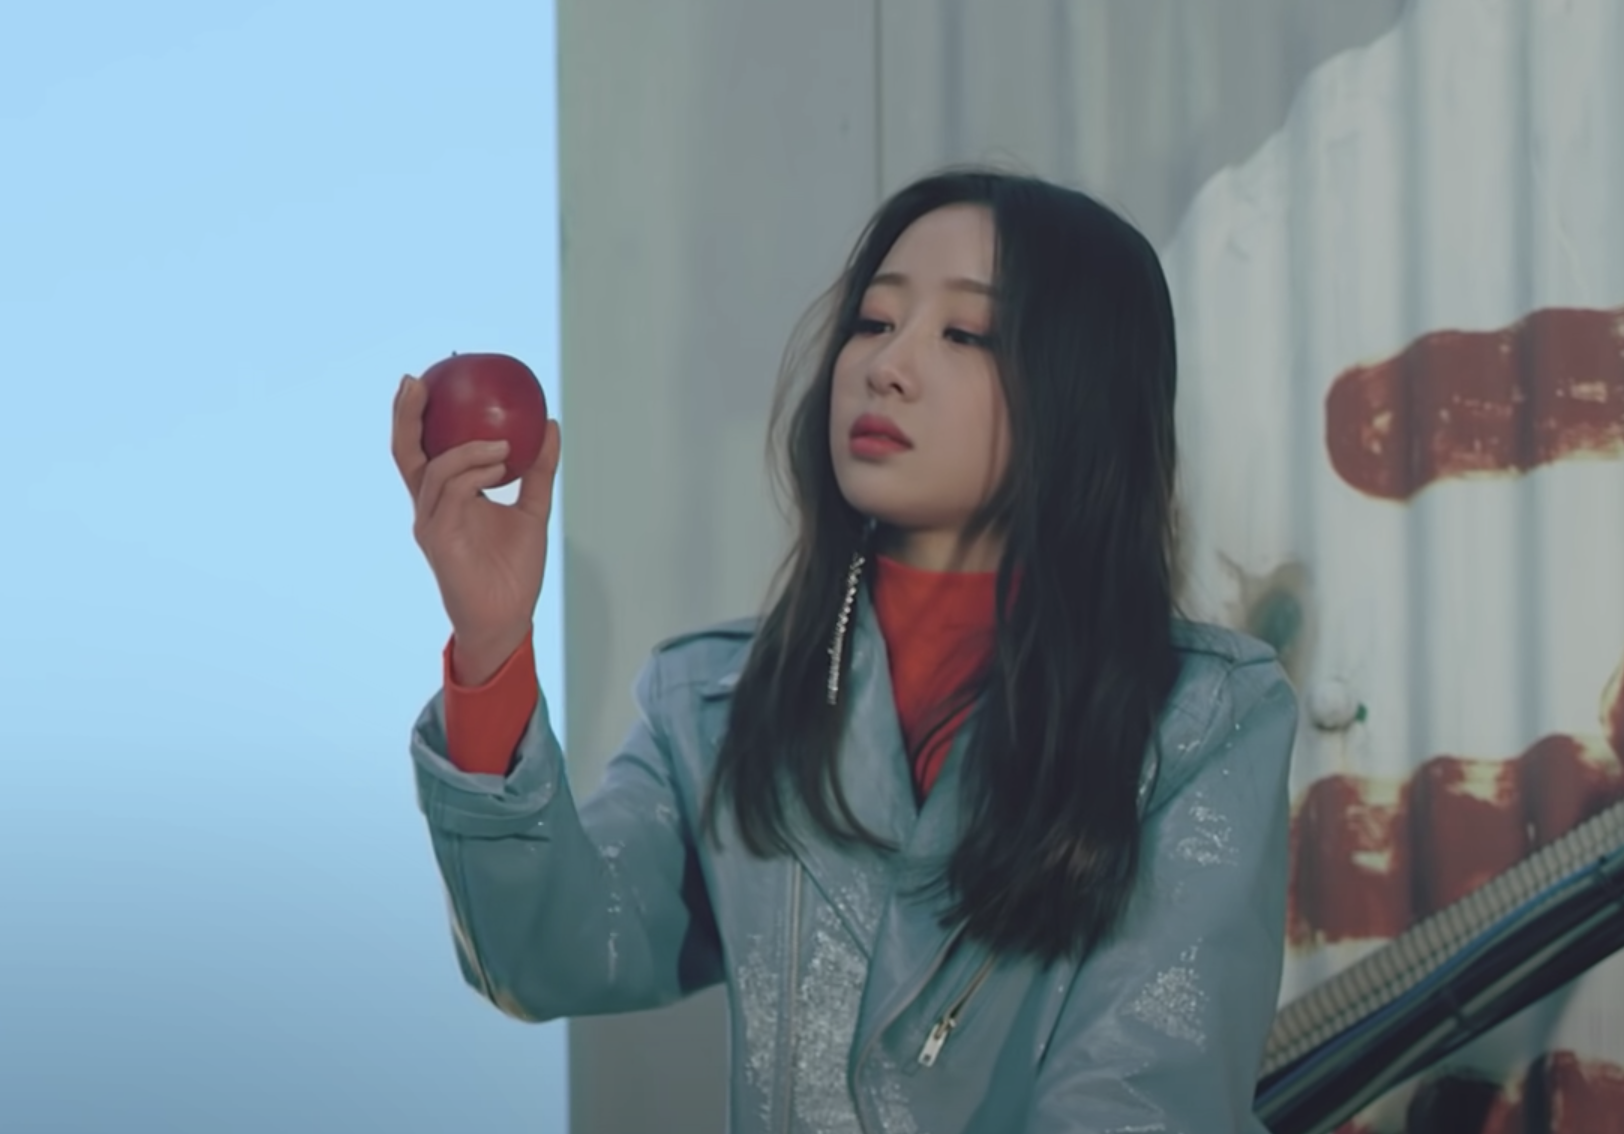 Yves holding out an apple in front of her